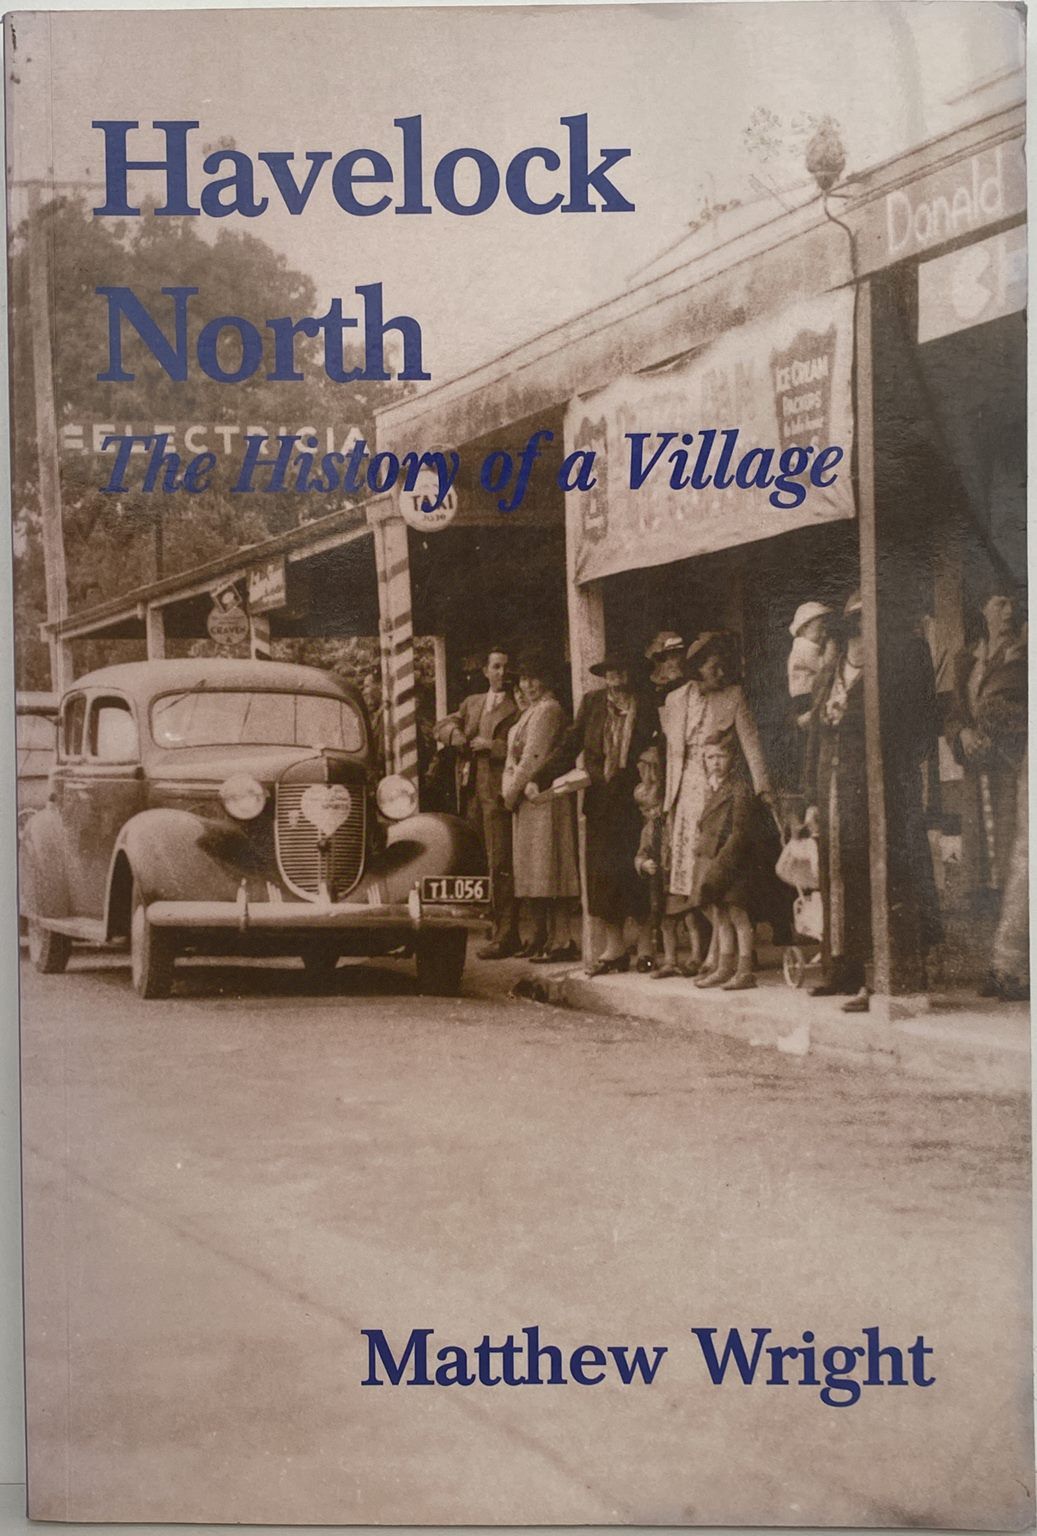 HAVELOCK NORTH: The History of a Village